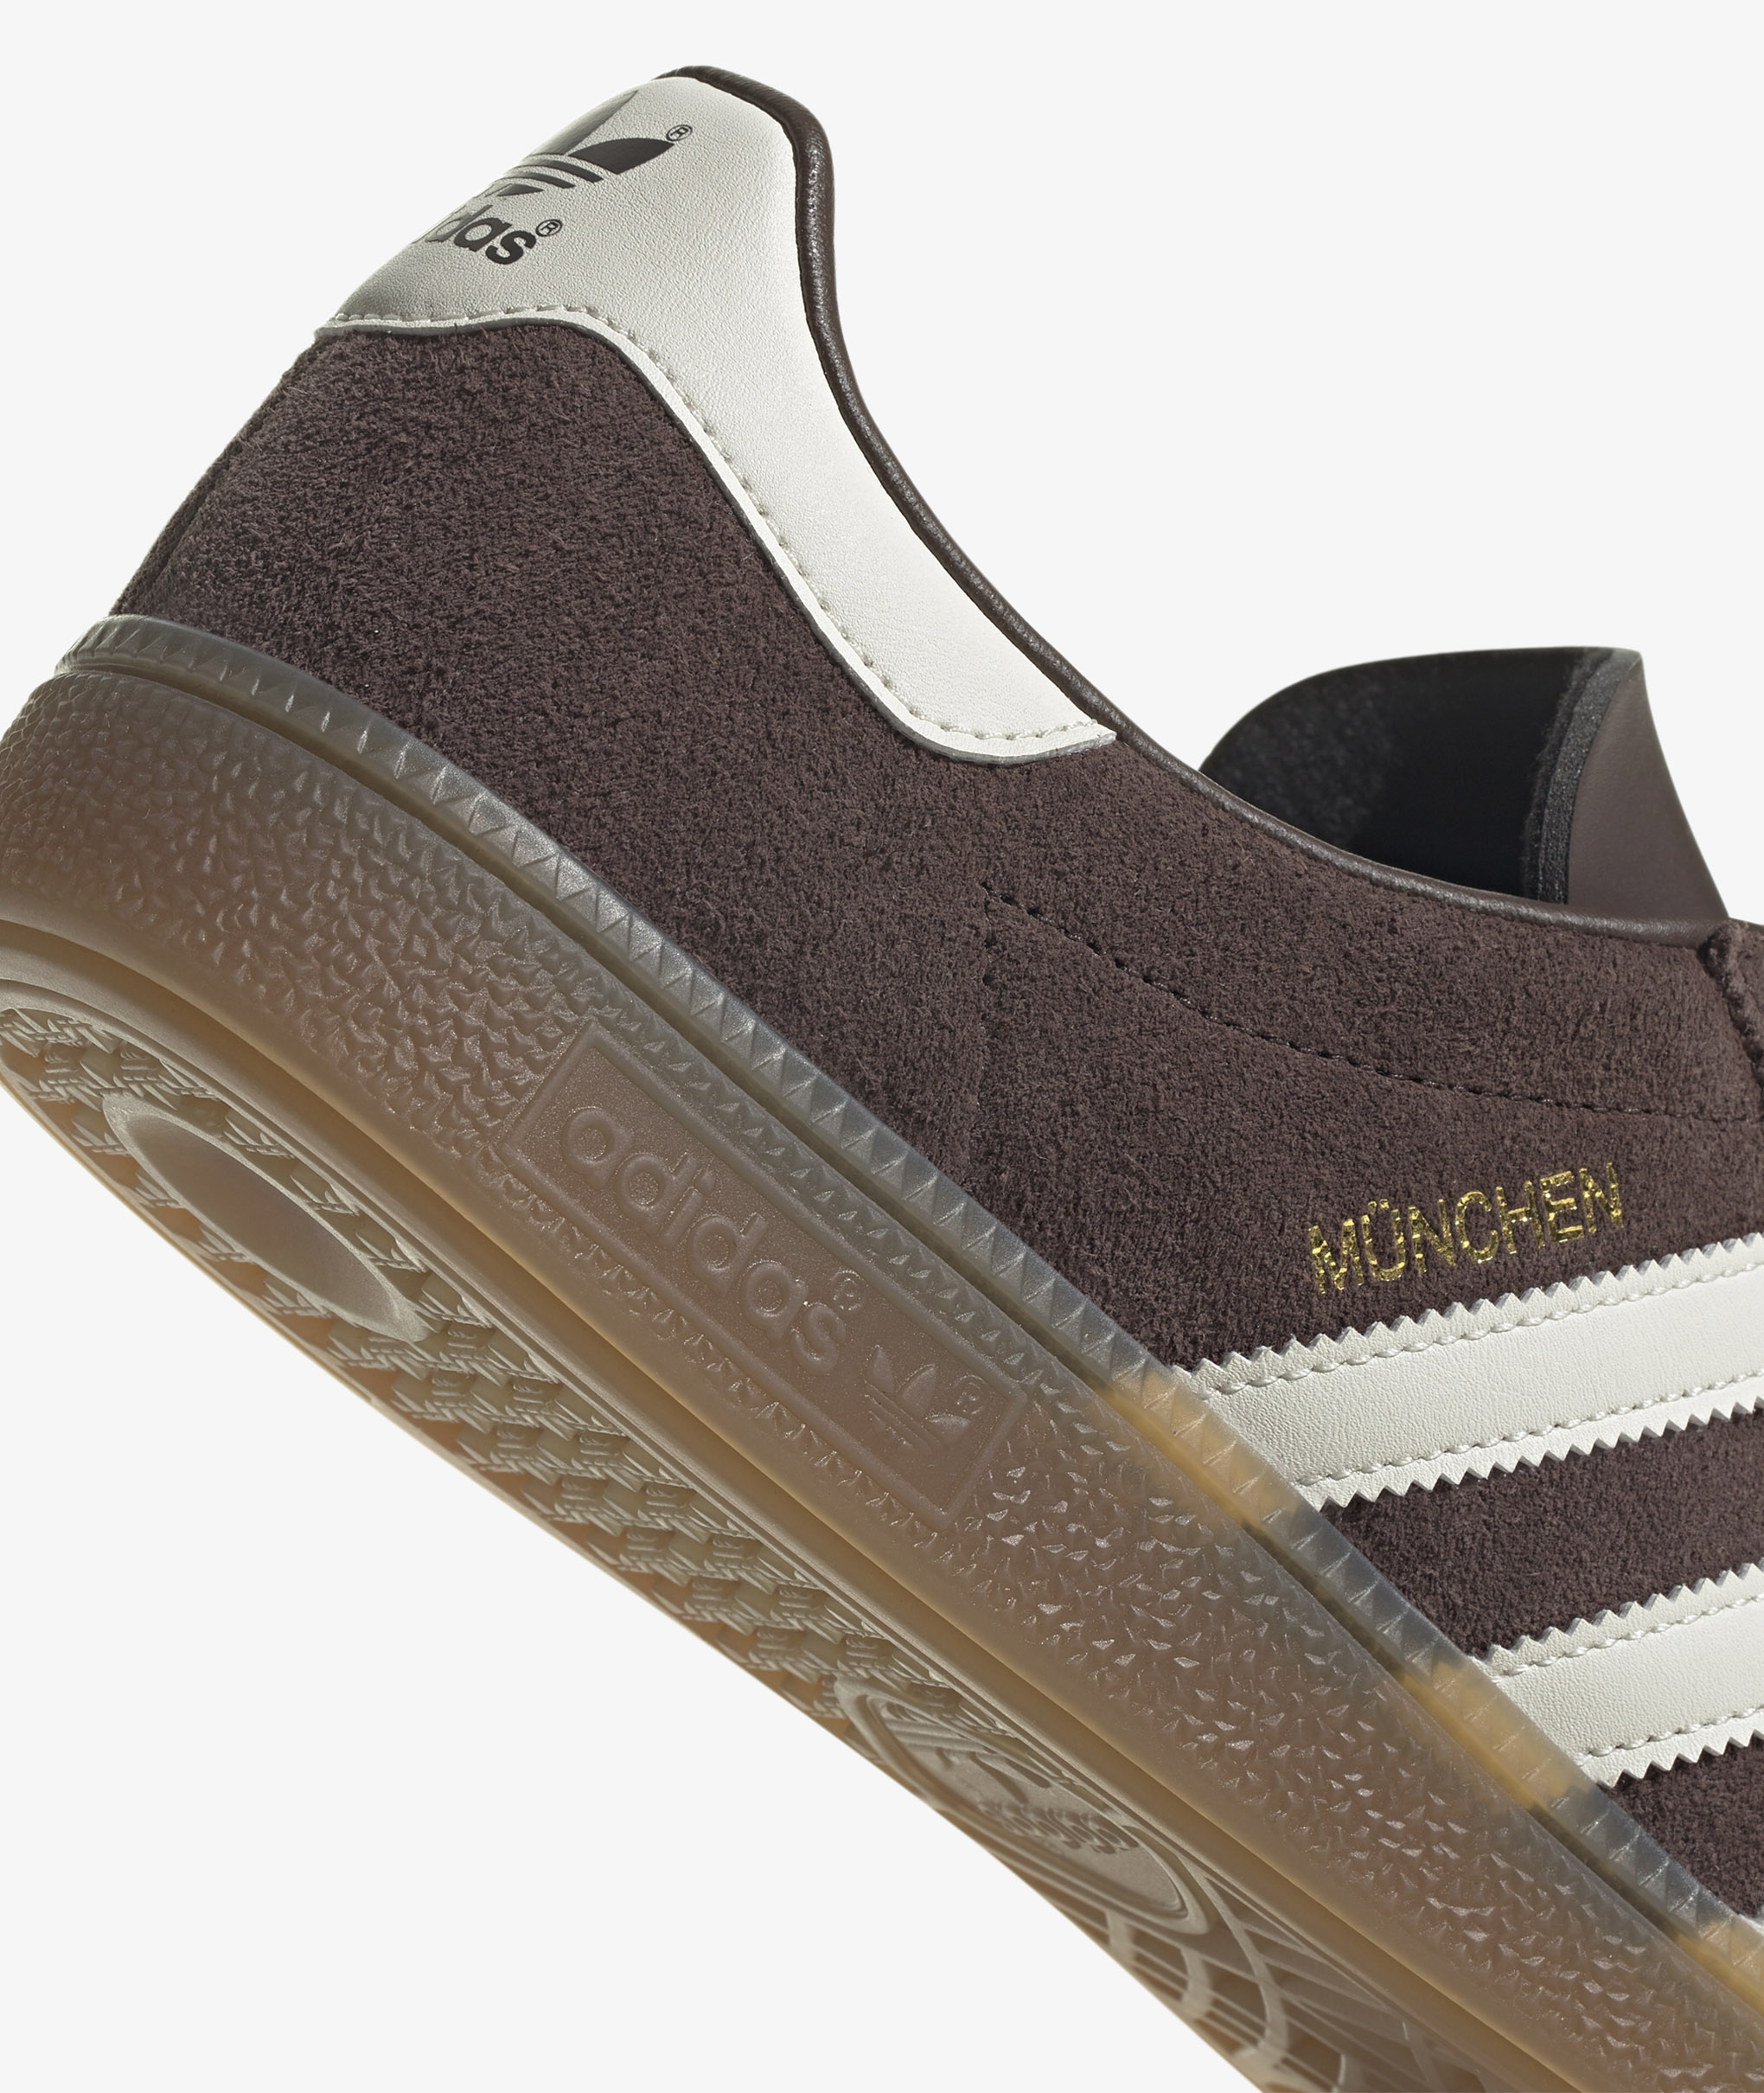 Snuggle up Estimated Ride Norse Store | Shipping Worldwide - adidas Originals Munchen - Brown / Off  White